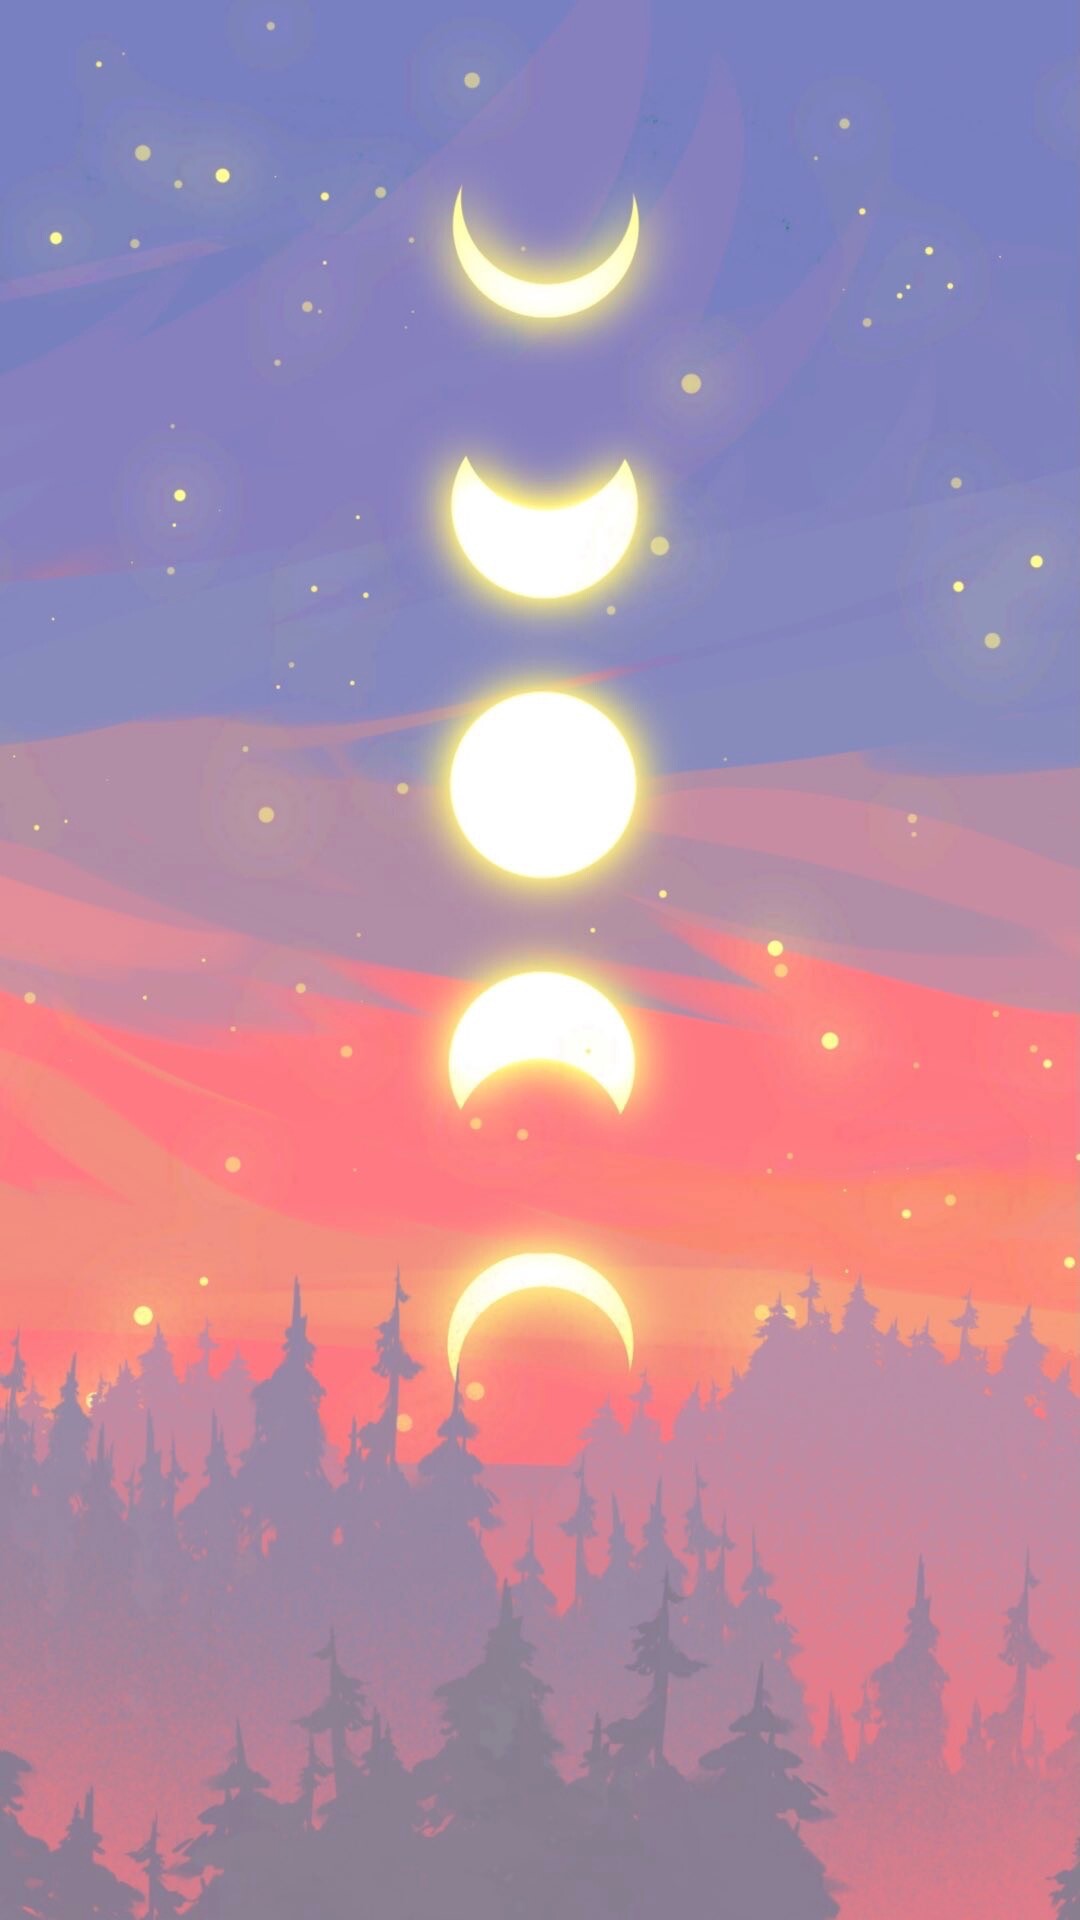 A digital painting of 5 moons arranged vertically across the red, orange, and blue sky above the pine trees